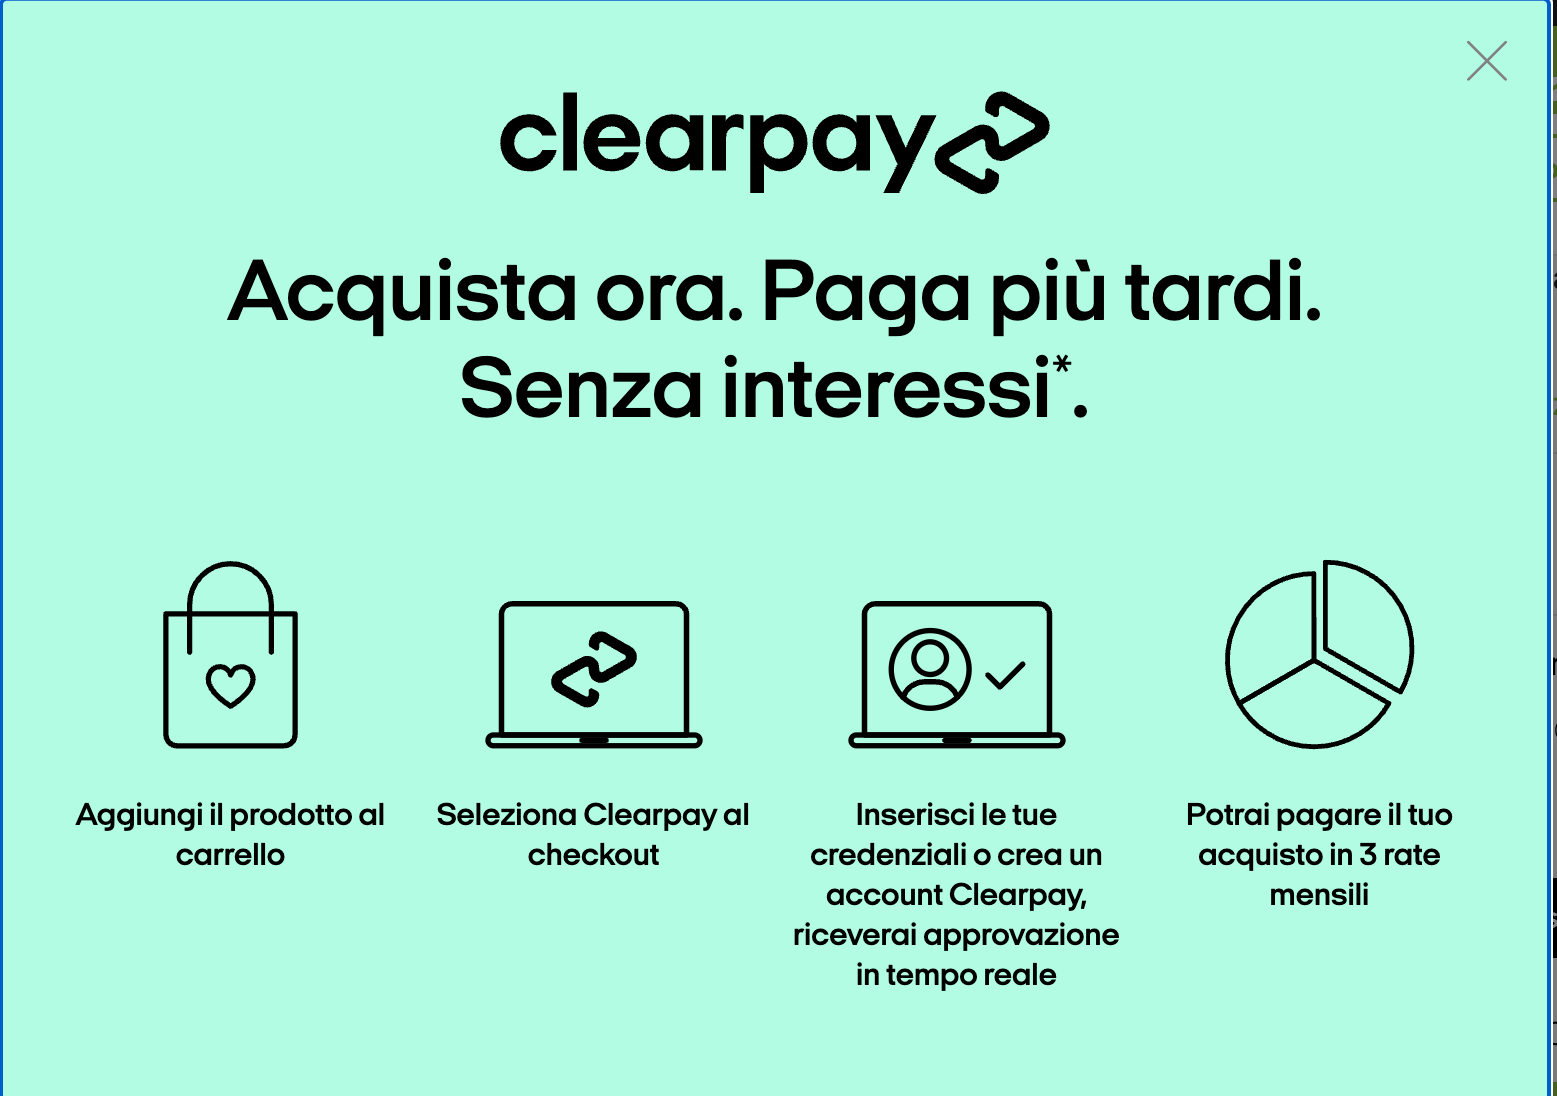 CLEARPAY